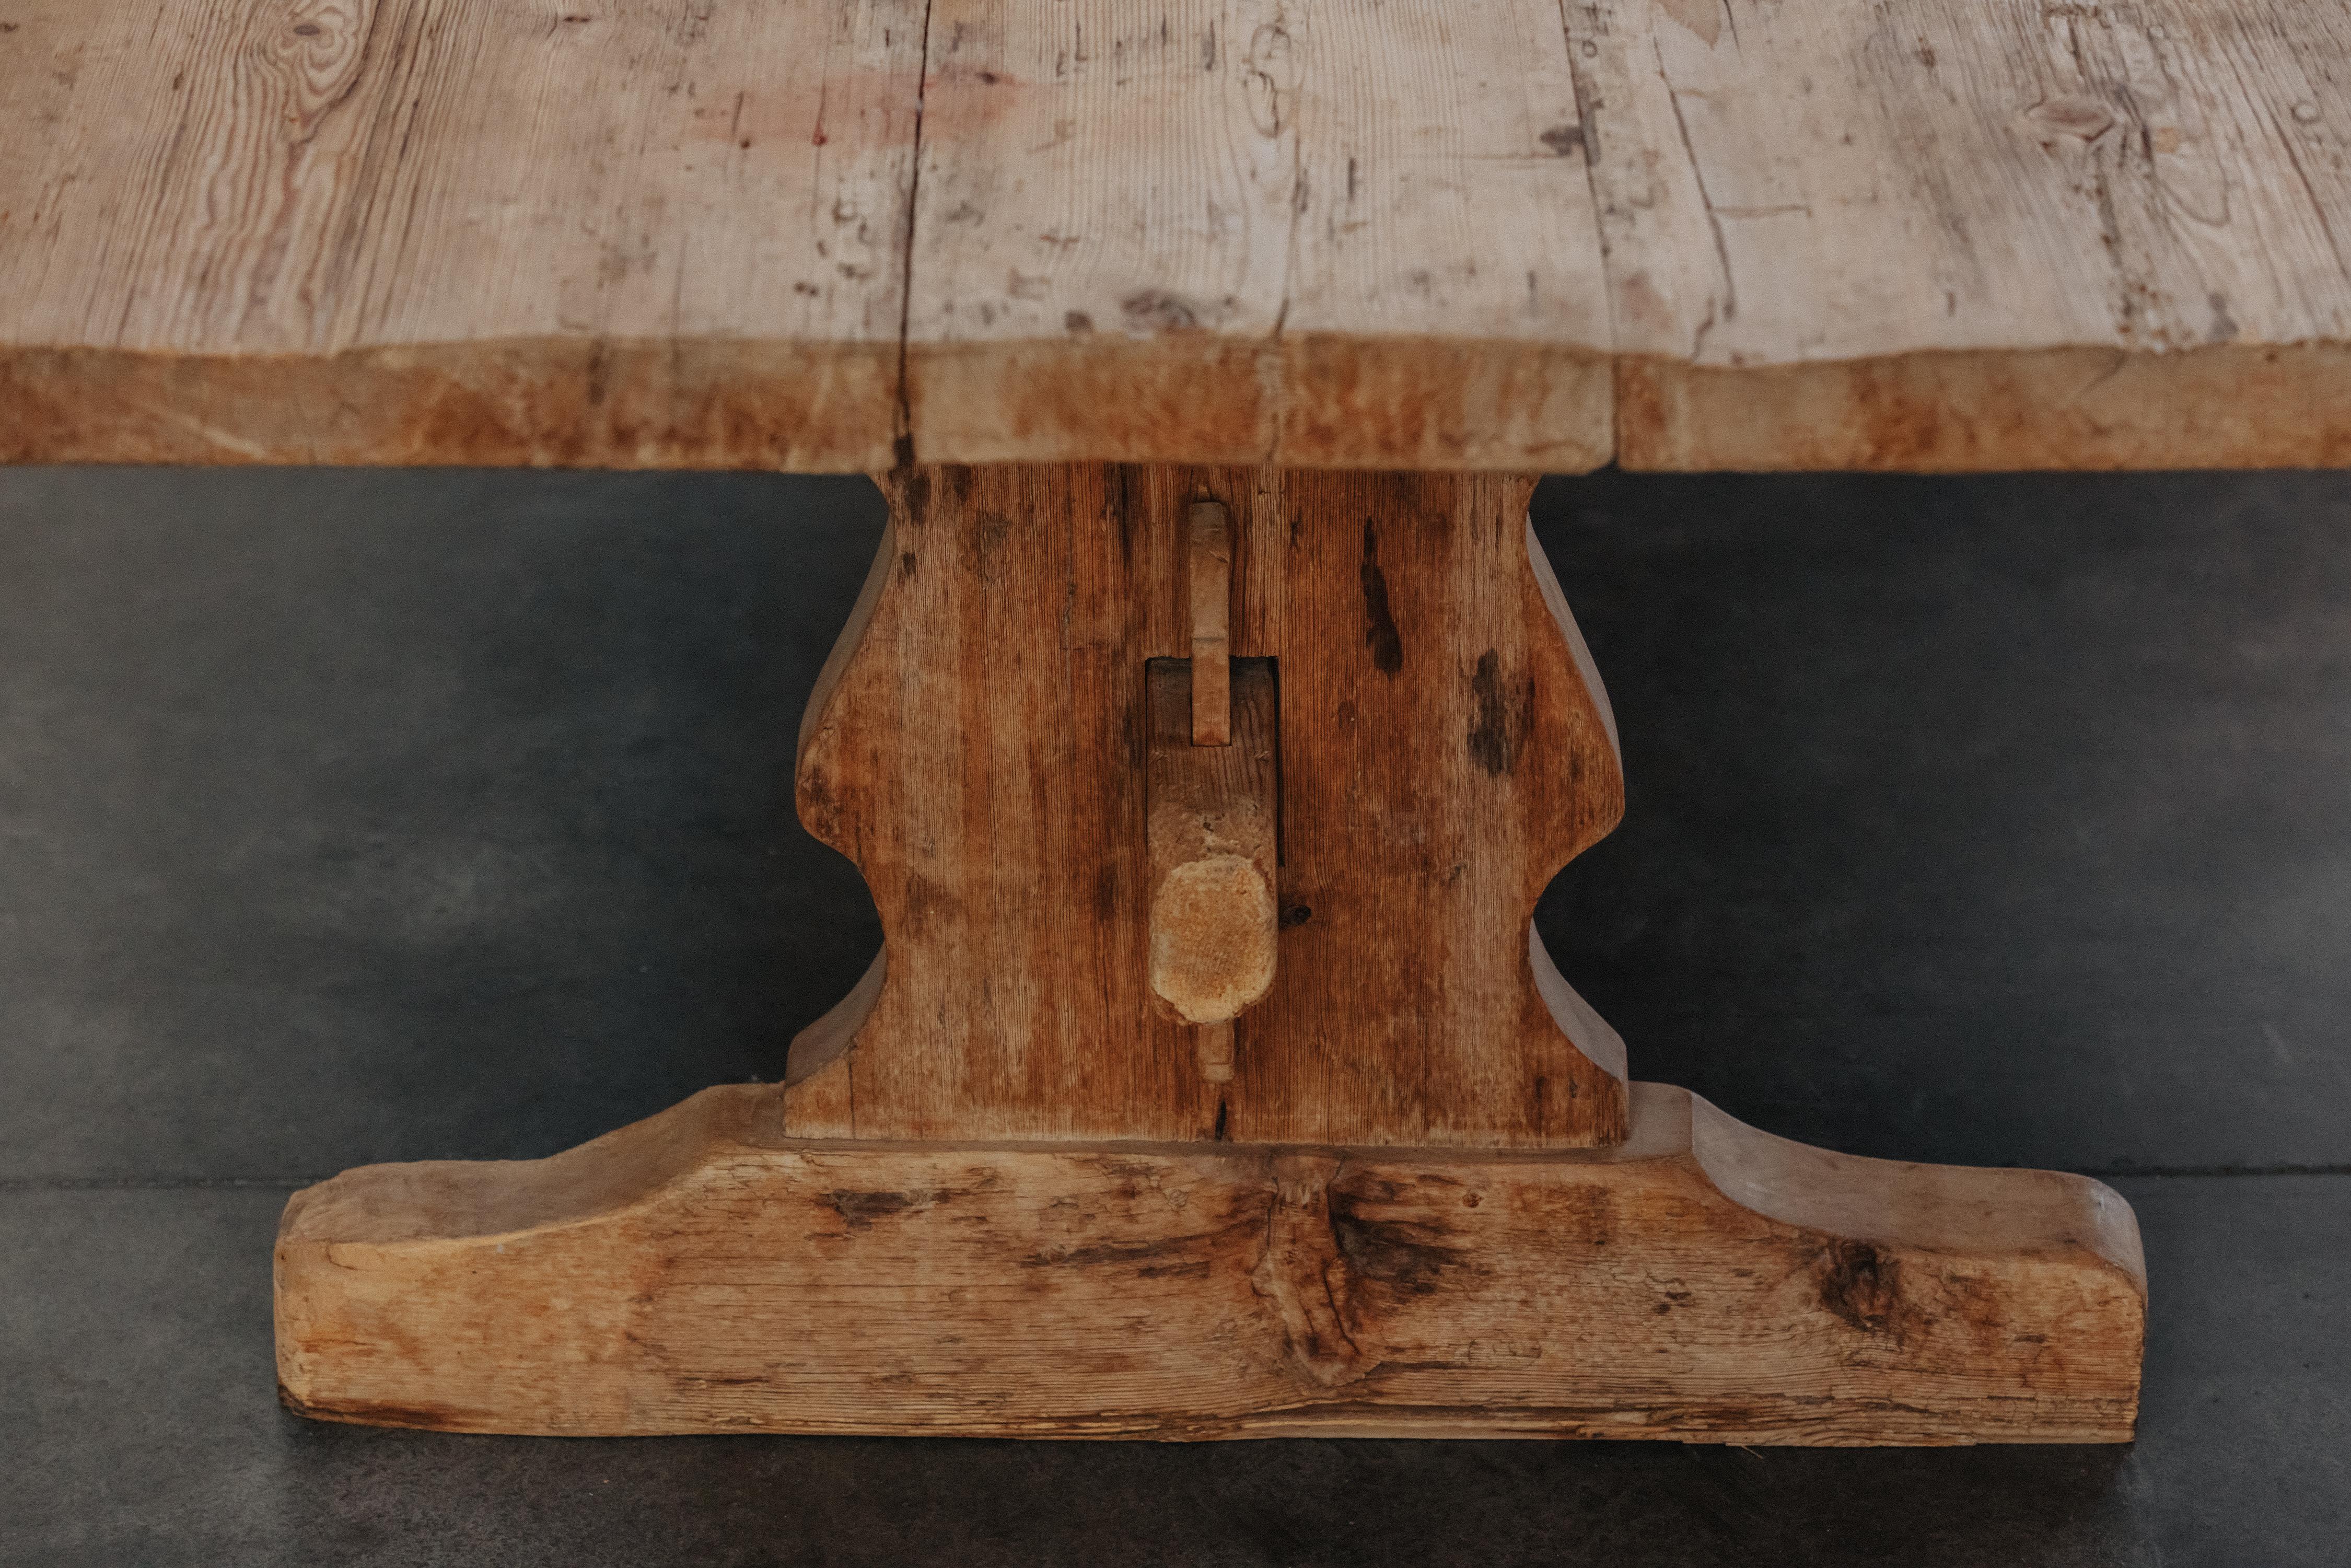 XL Pine Bockbord Dining Table From Sweden, Circa 1780.  Solid pine construction with fantastic wear and use.  Disassembles into four pieces for shipping if needed.

